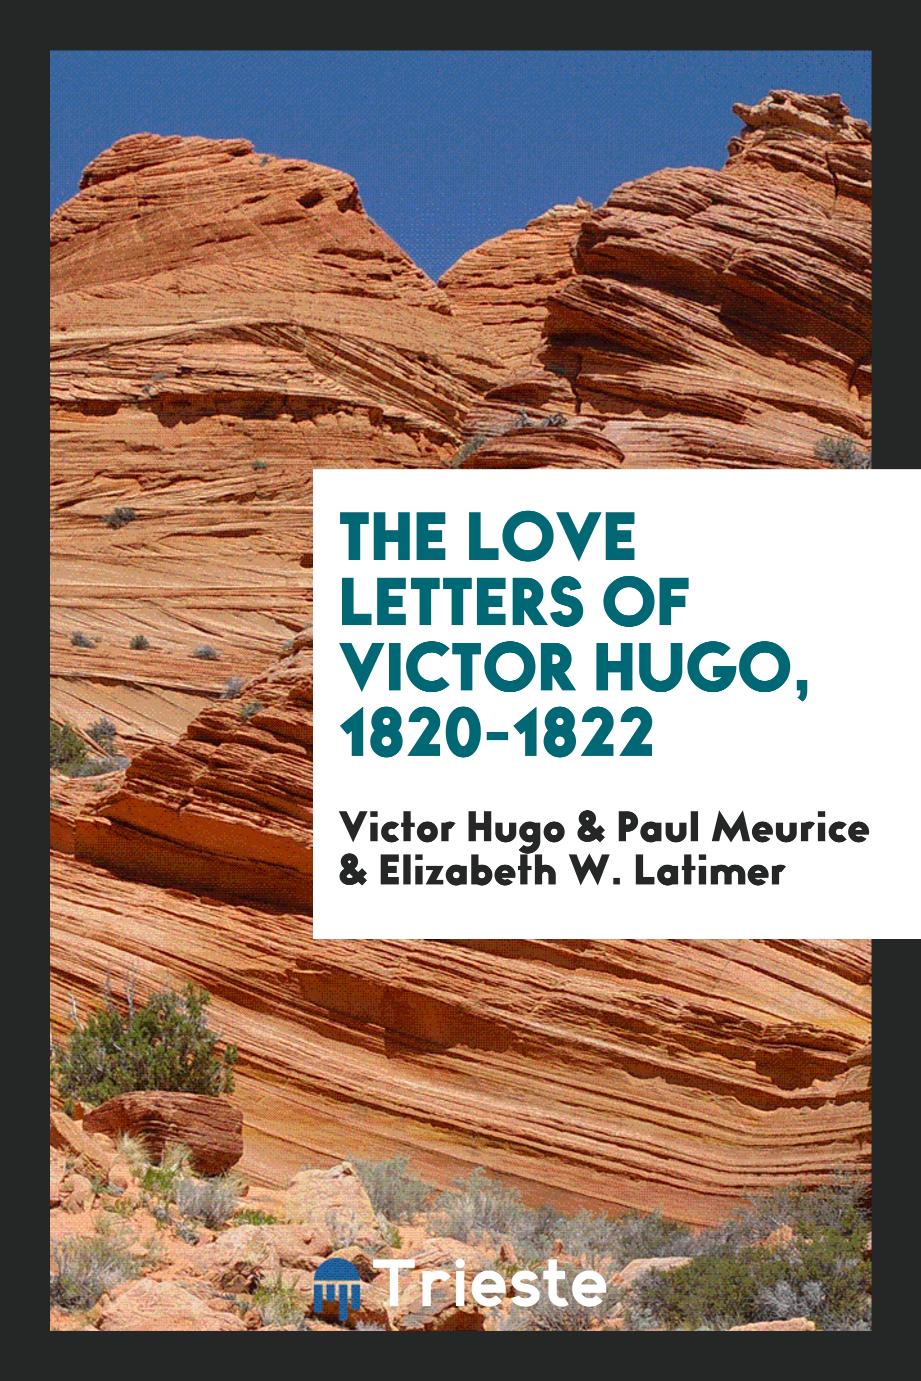 The love letters of Victor Hugo, 1820-1822